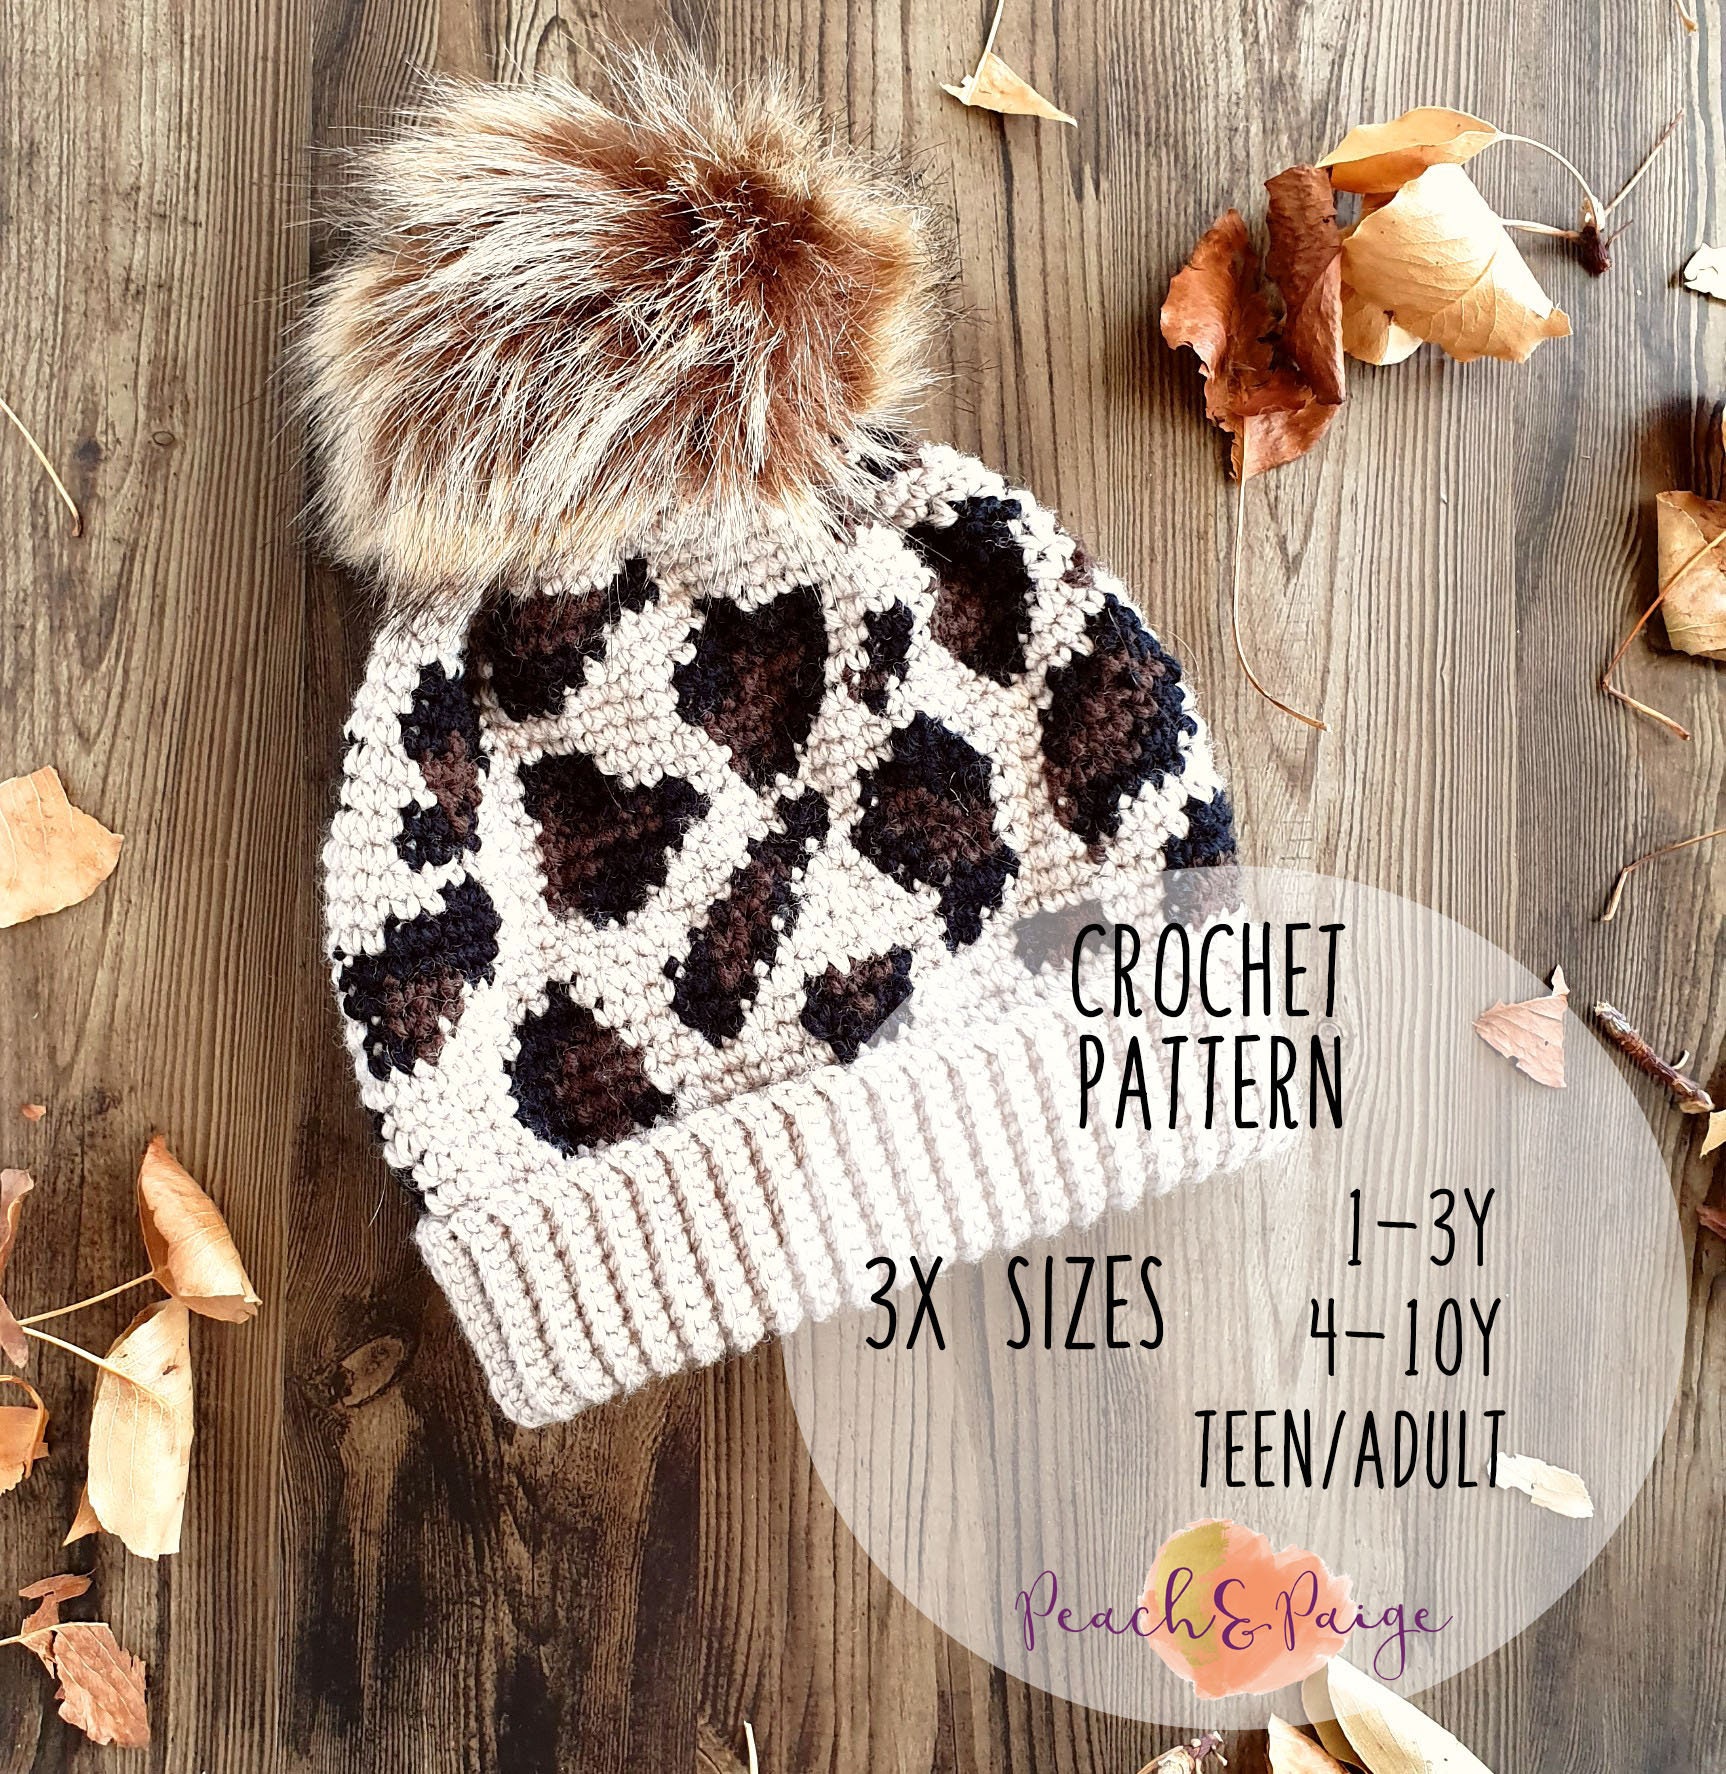 Leopard Print Beanie Hat Trendy Animal Pattern Skull Cap 2 Layers Cuffed  Hats Winter Thick Knitted Watch Caps